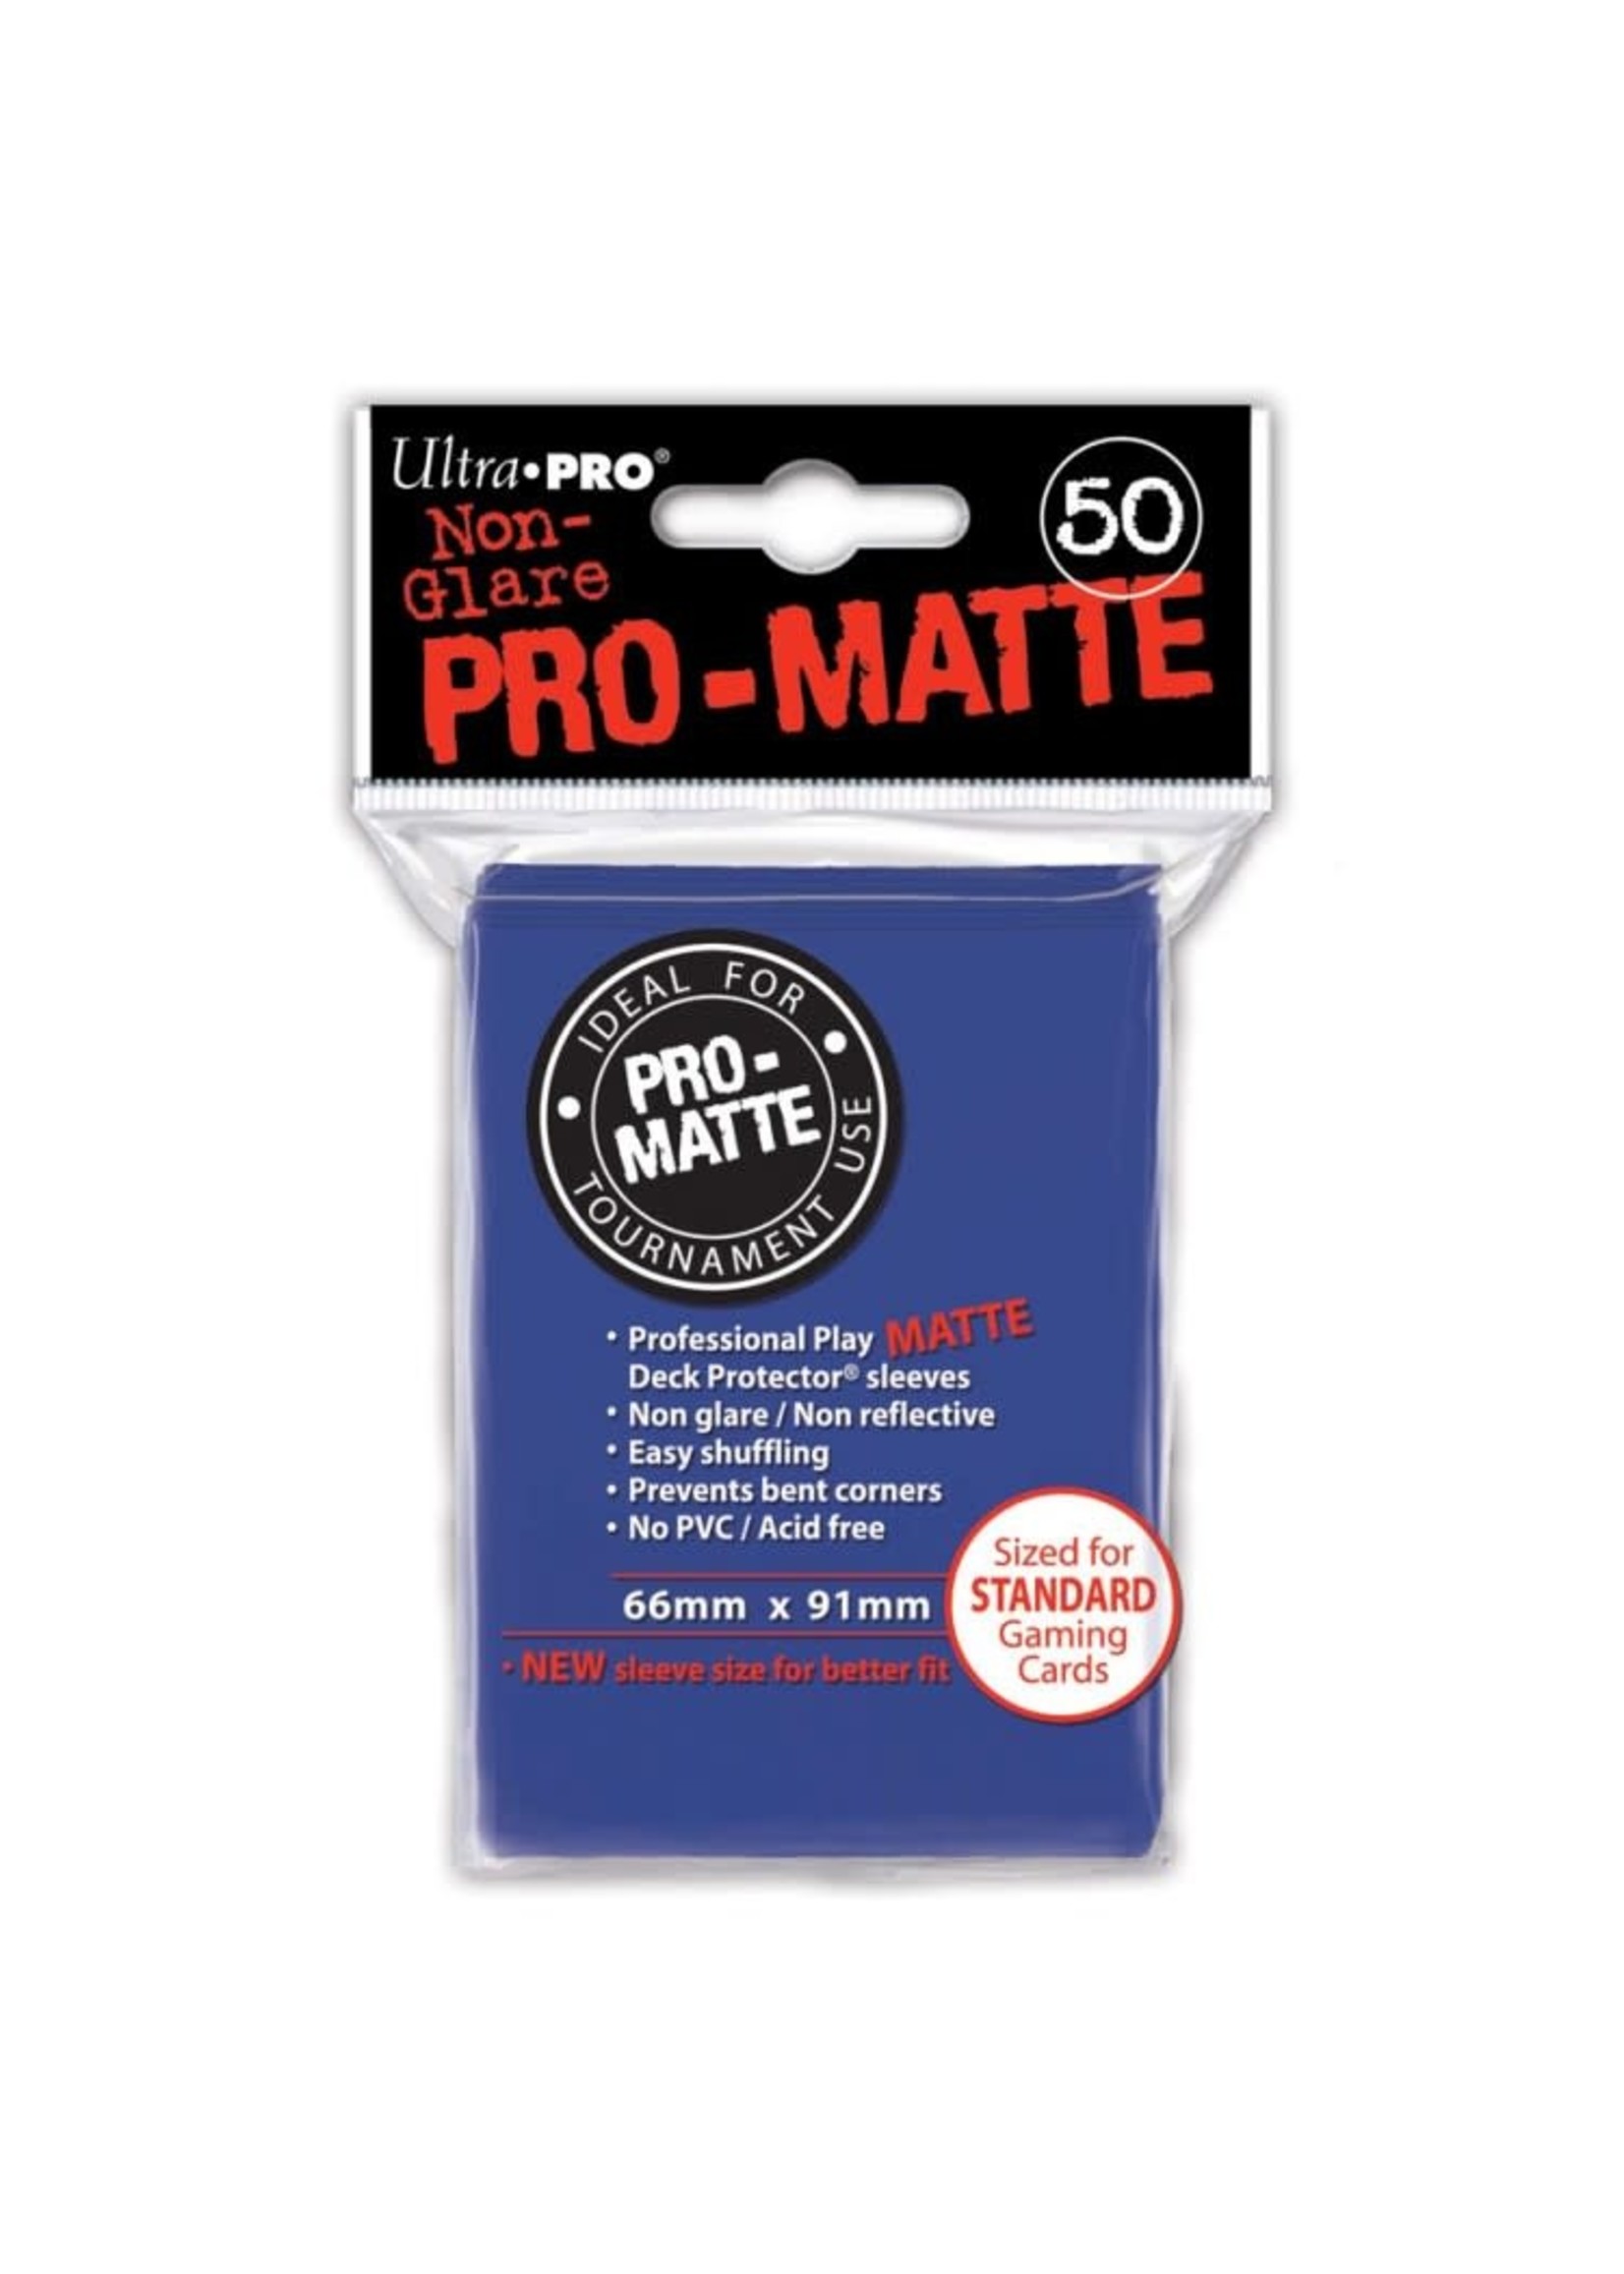 Ultra Pro Deck Protector Sleeves Pro-Matte Blue (50)